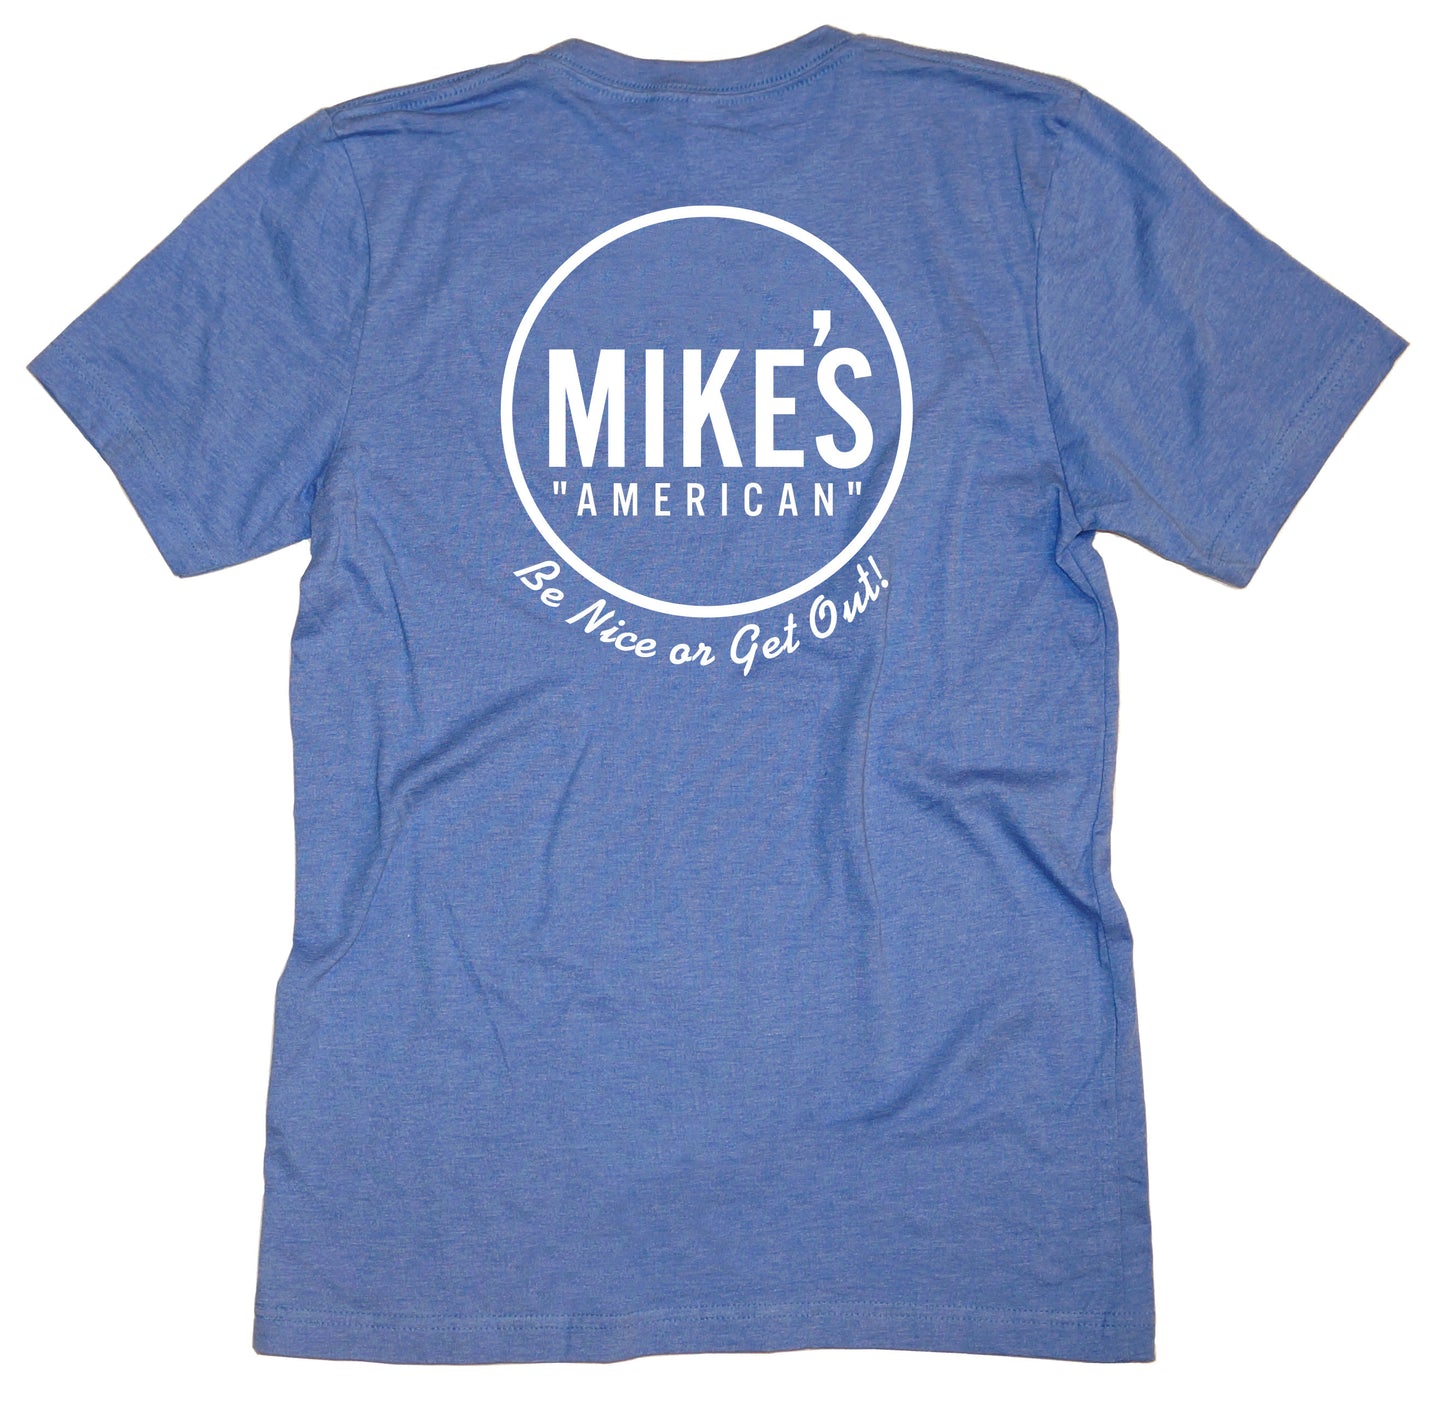 Mike's American T-Shirt